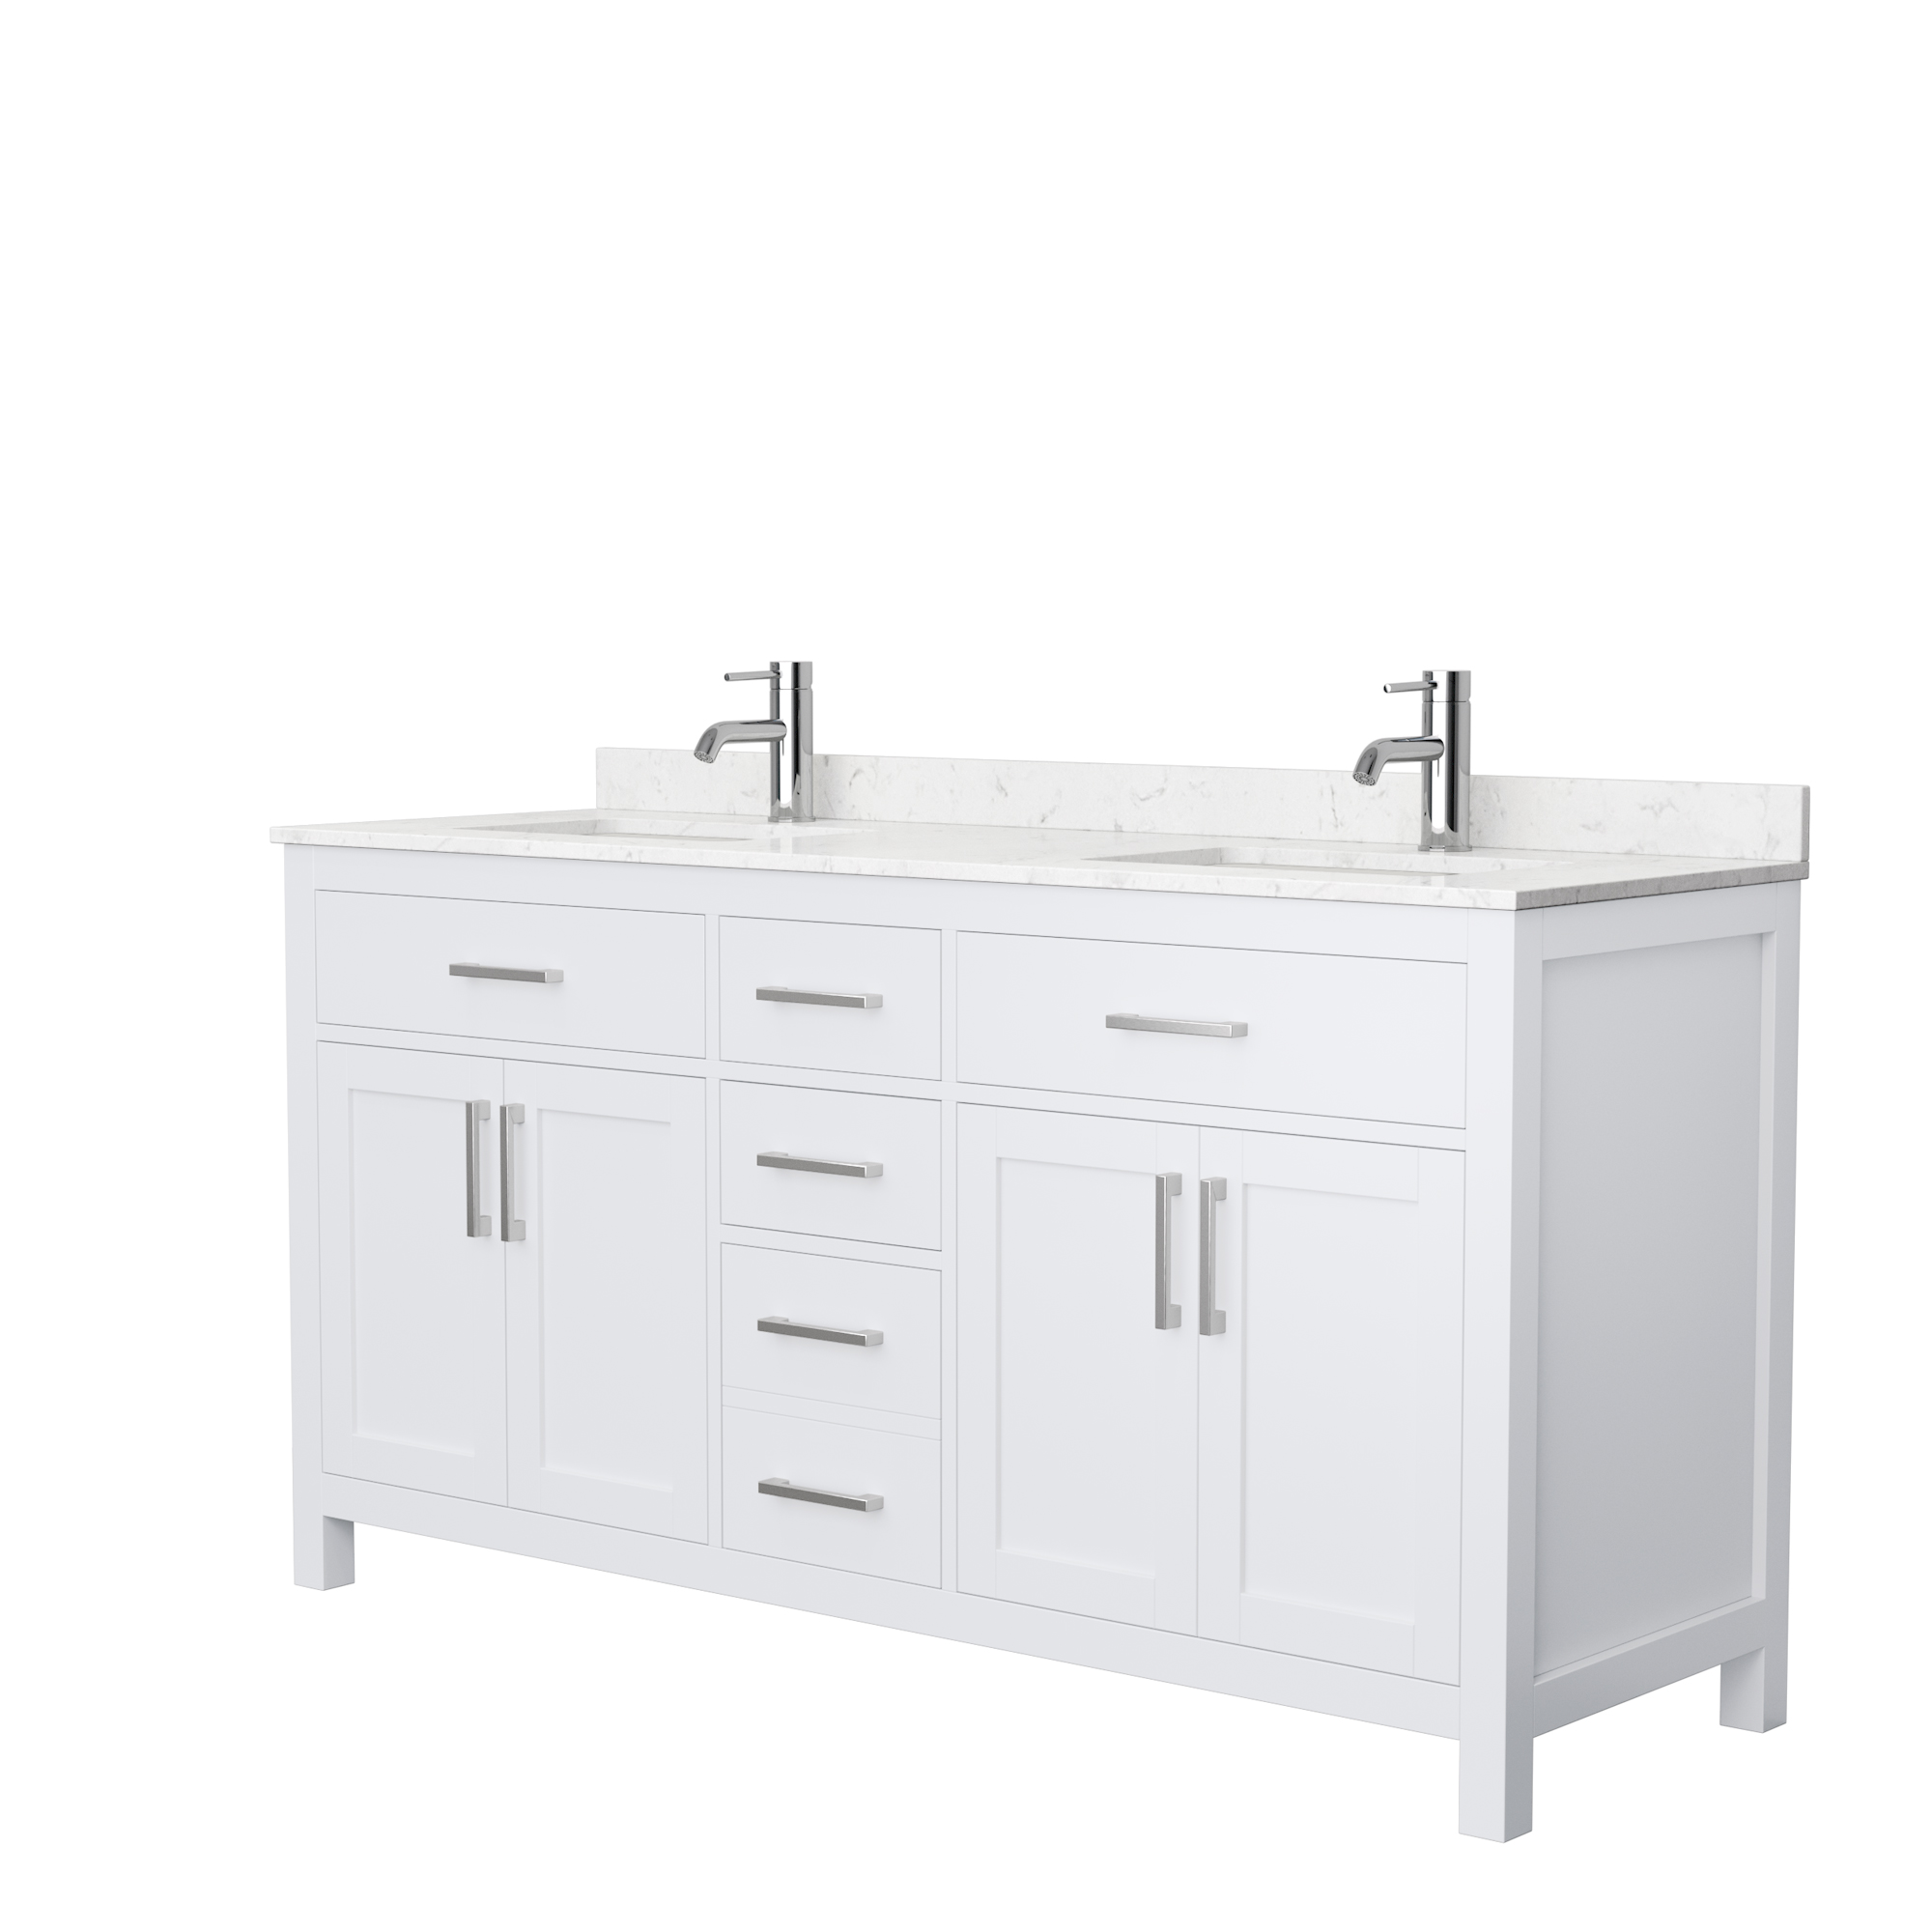 Beckett 66 Double Bathroom Vanity White Beautiful Bathroom Furniture For Every Home Wyndham Collection